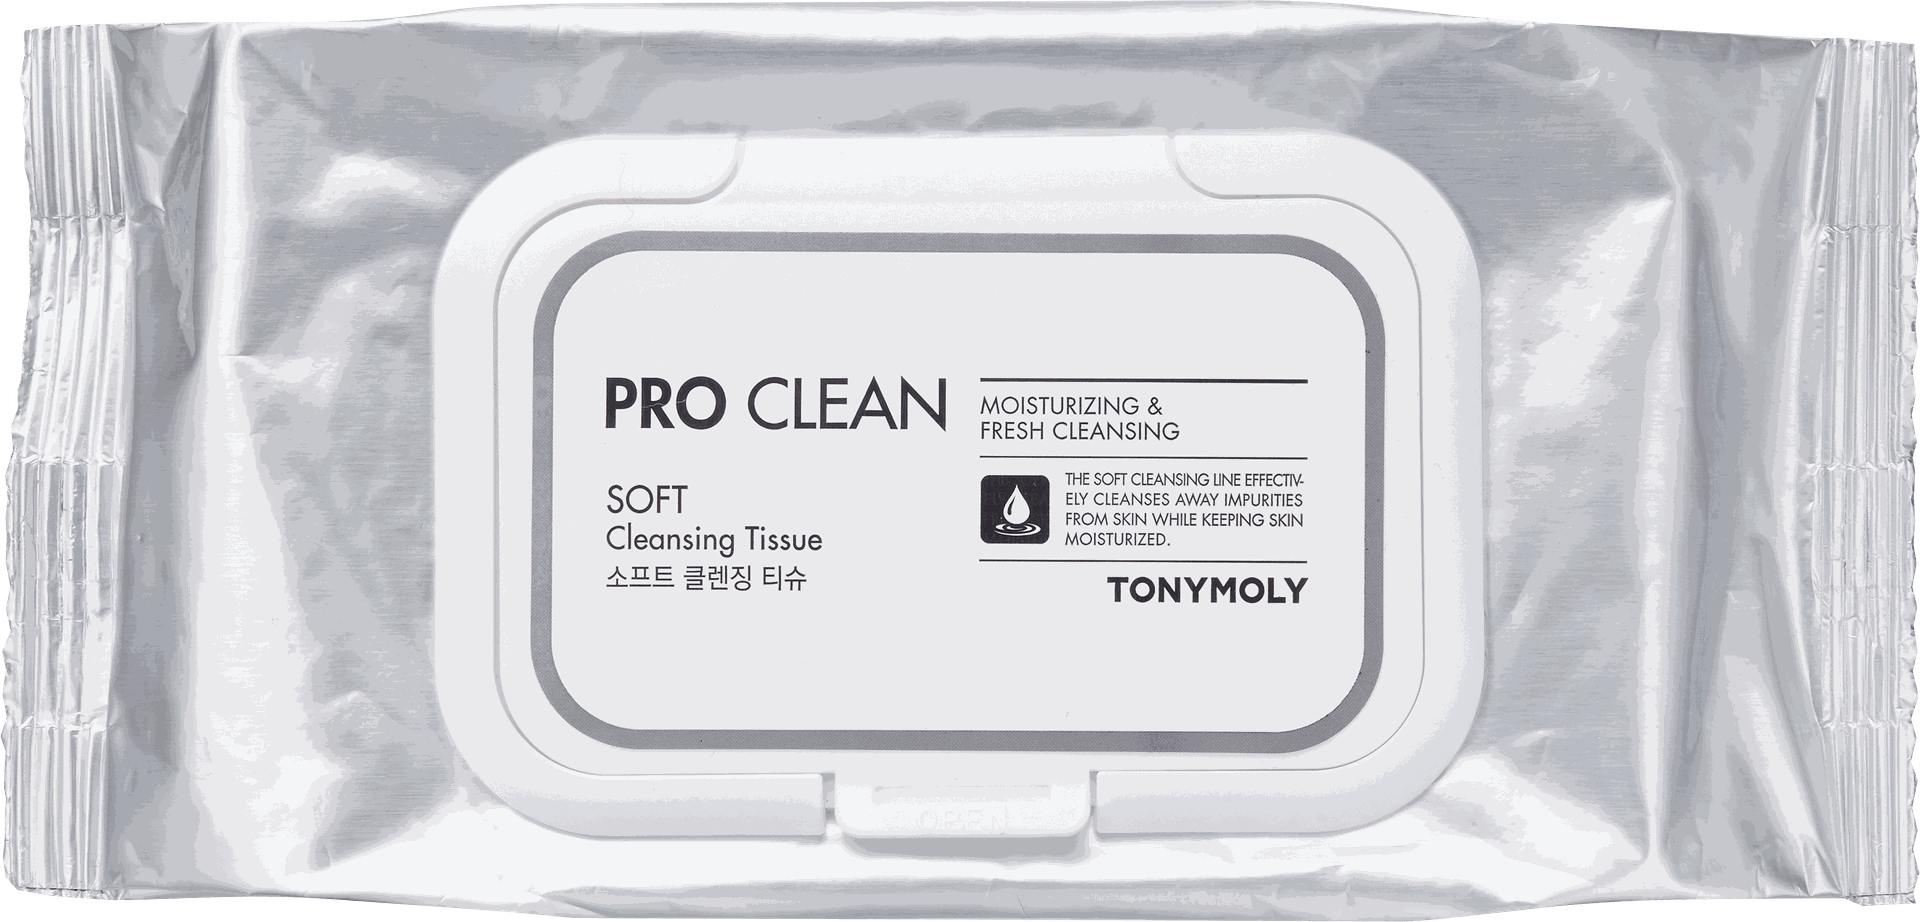 PRO CLEAN SOFT CLEANSING TISSUE 50